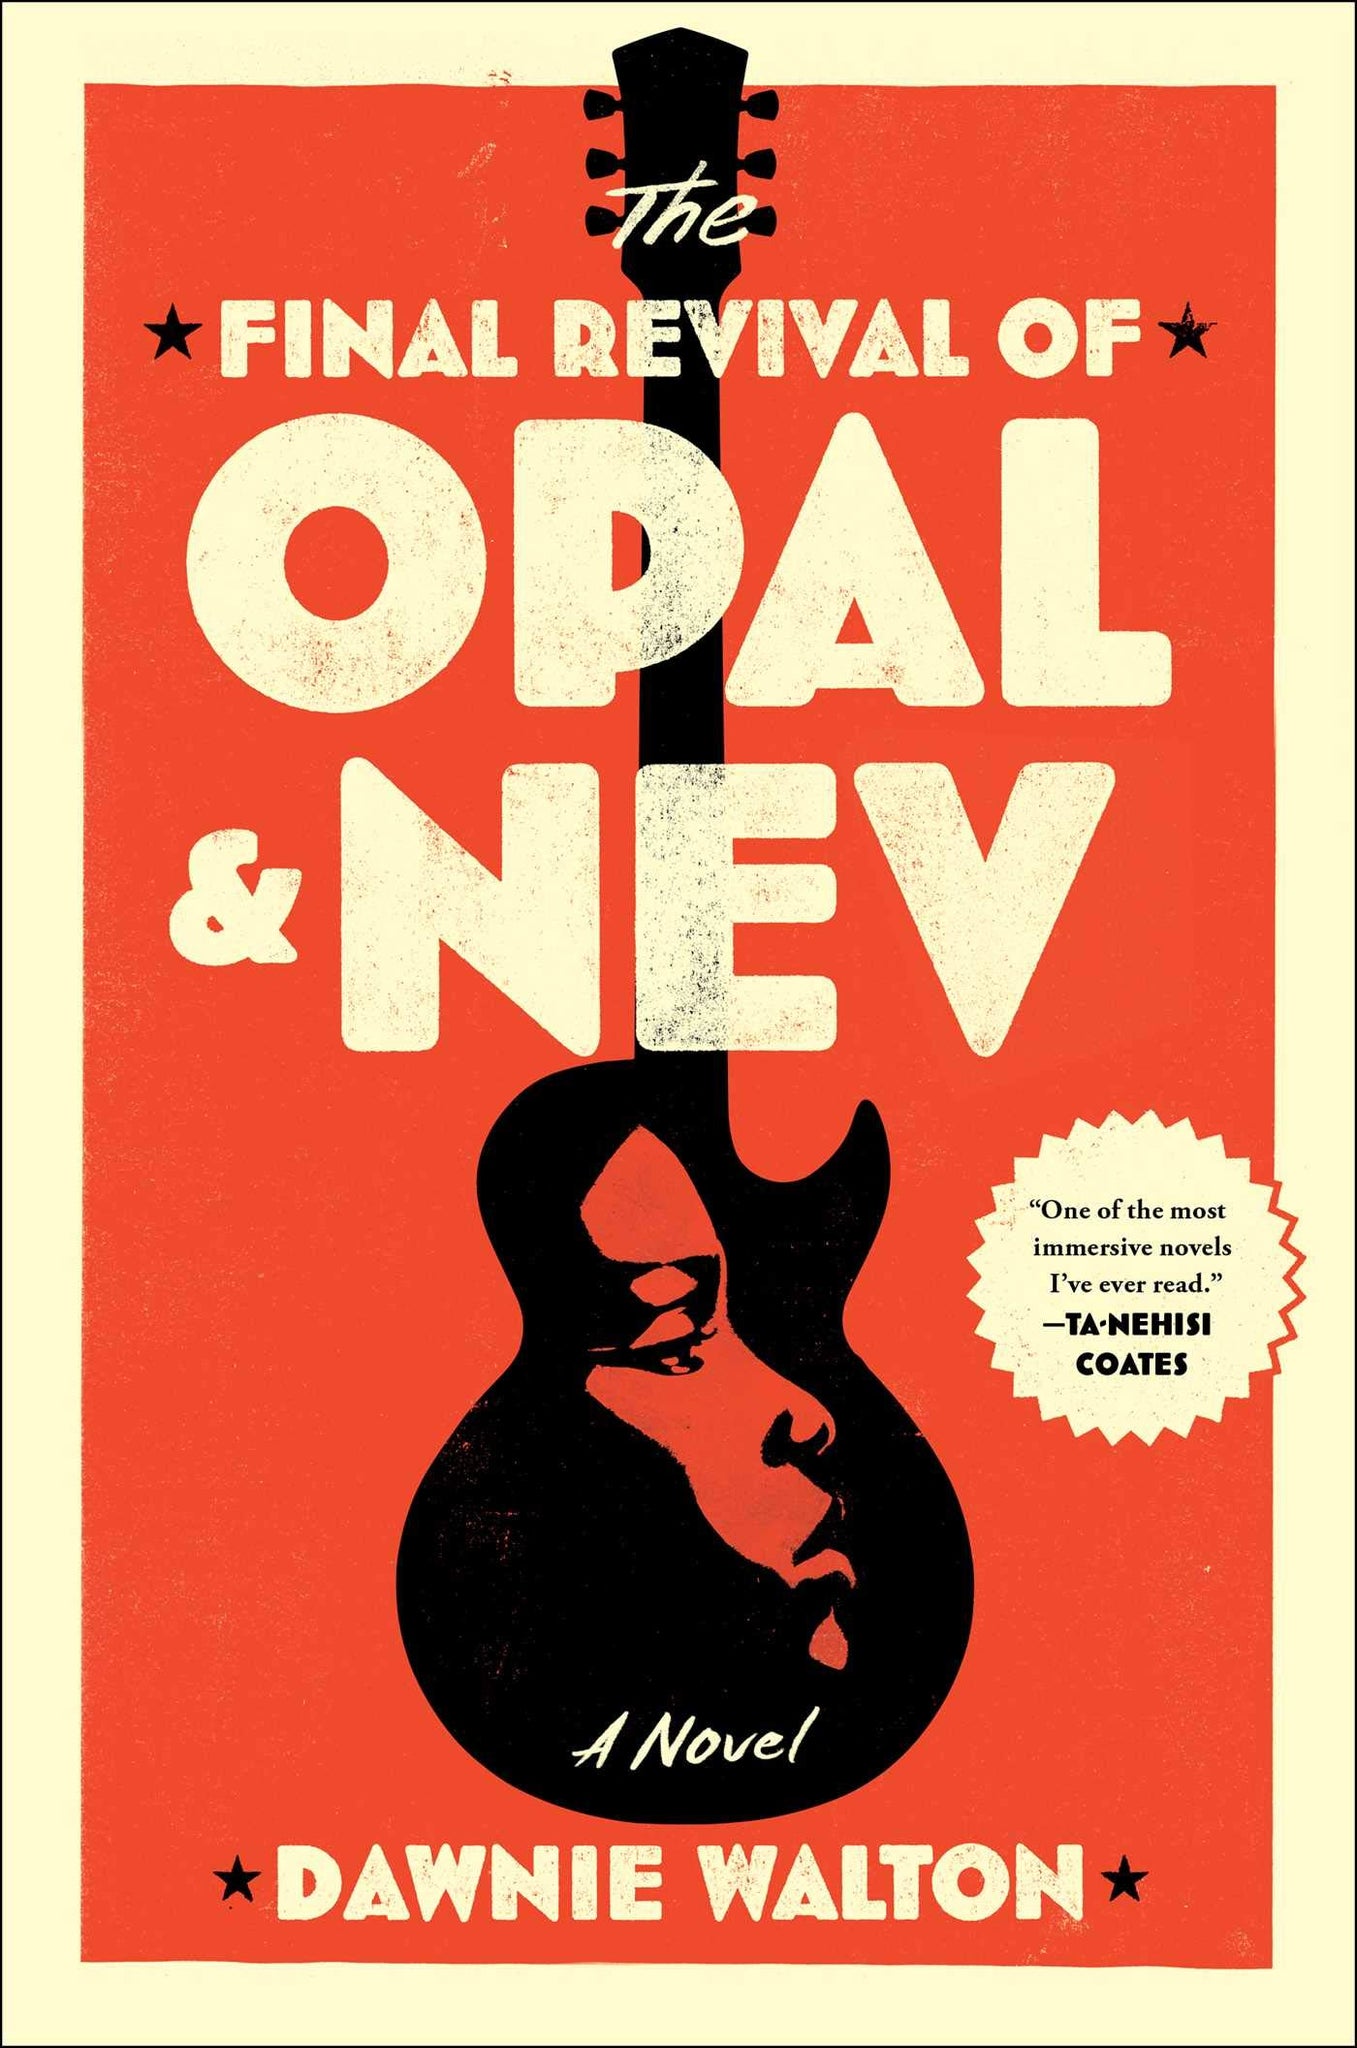 THE FINAL REVIVAL OF OPAL & NEV